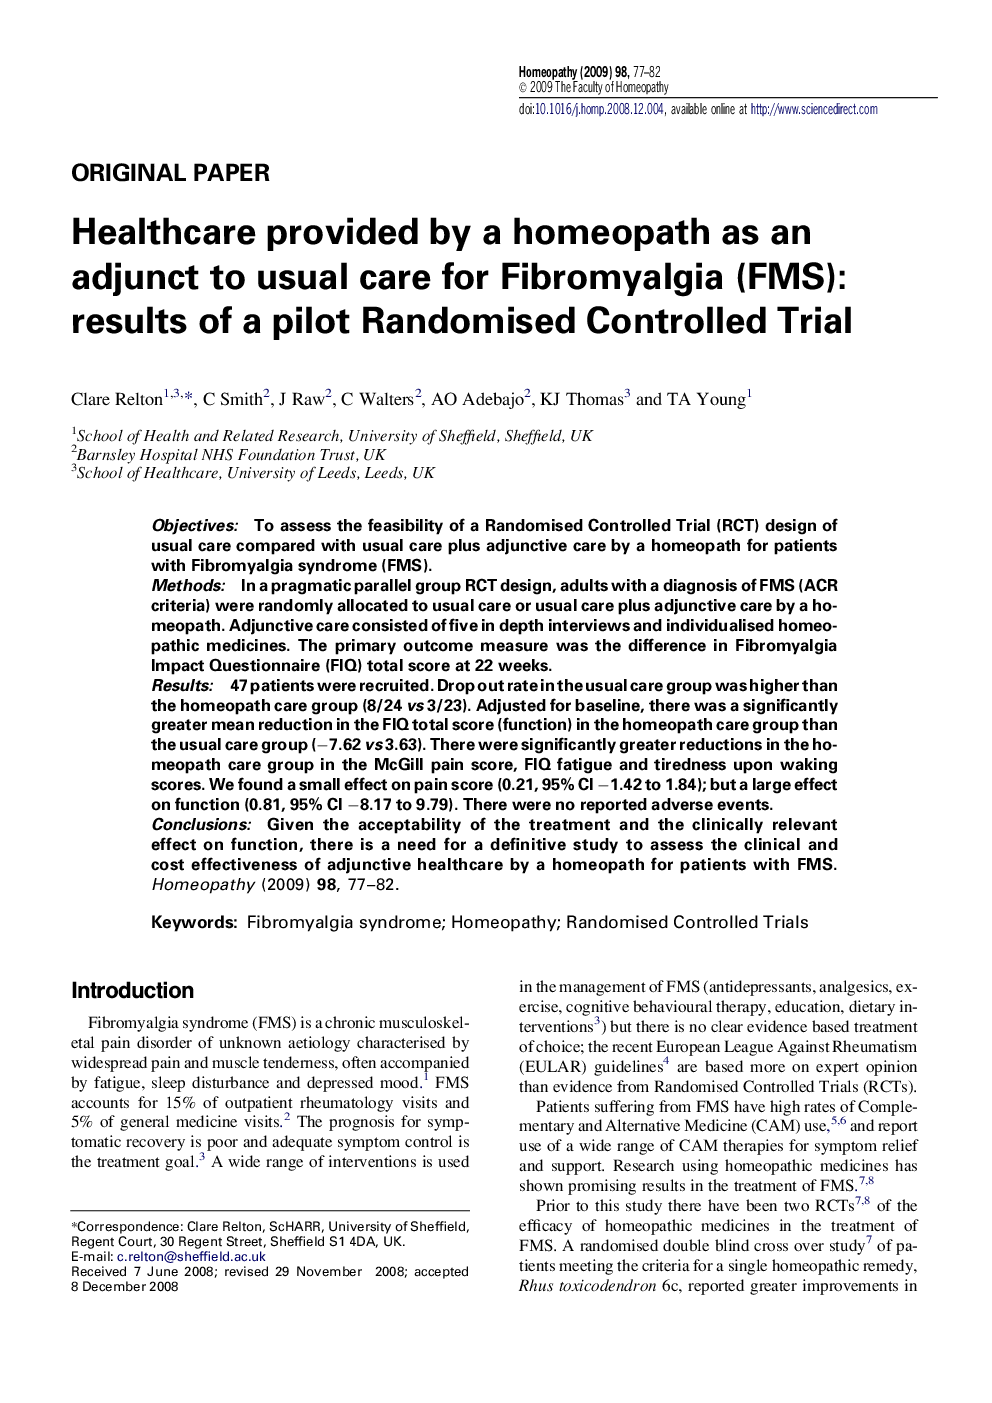 Healthcare provided by a homeopath as an adjunct to usual care for Fibromyalgia (FMS): results of a pilot Randomised Controlled Trial